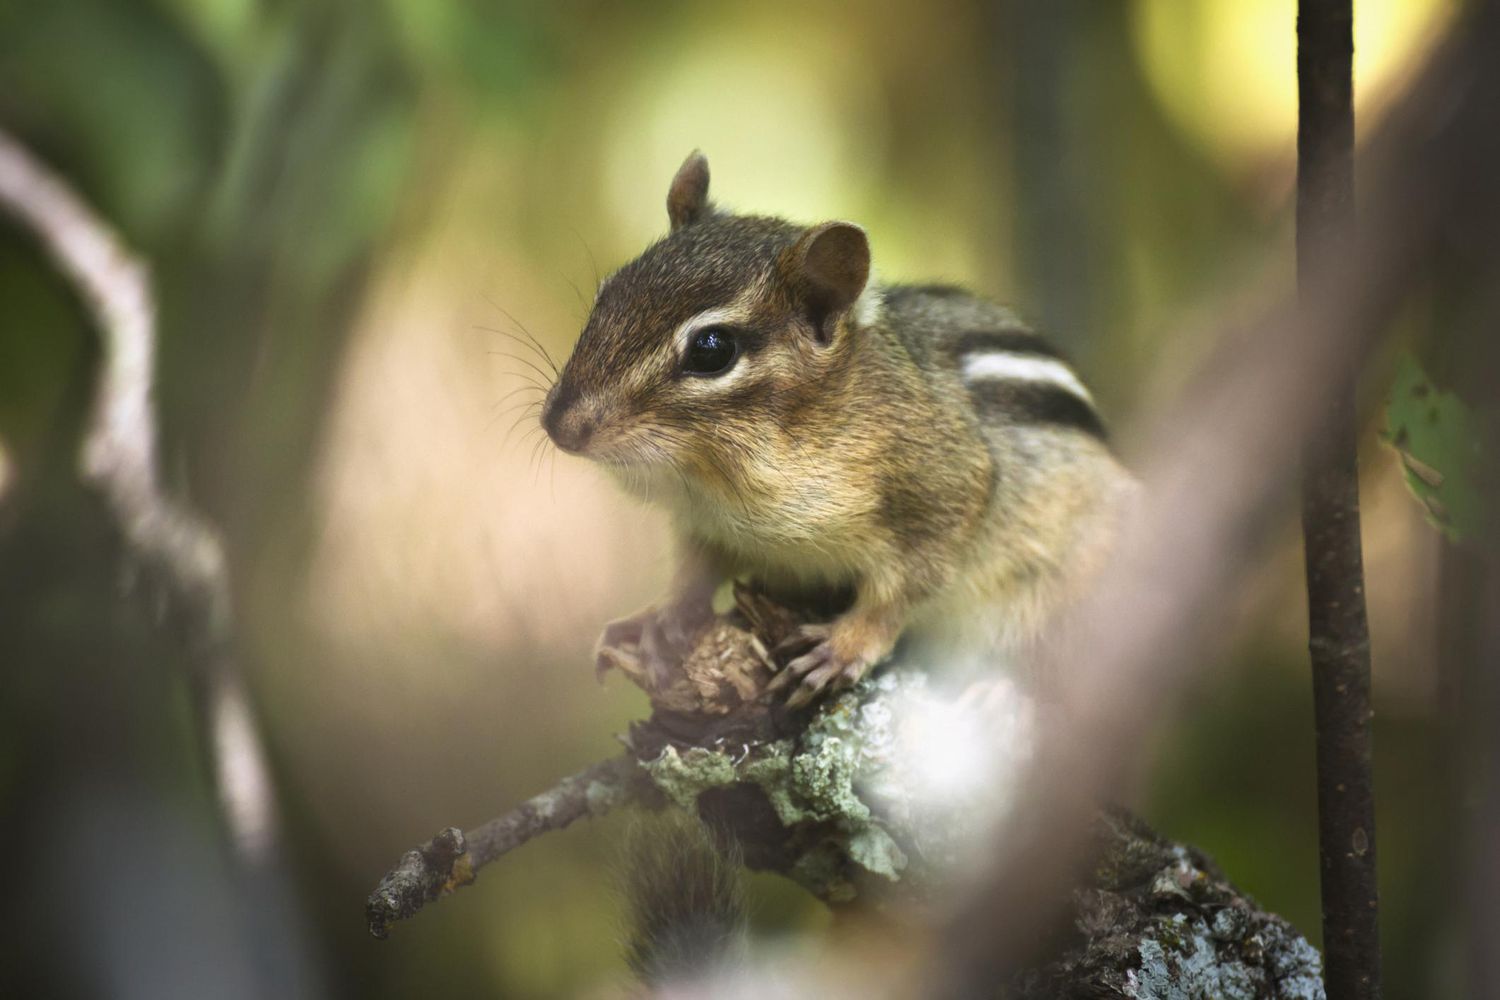 Chipmunk repellent plants – 8 plants known to discourage nibbling chipmunks